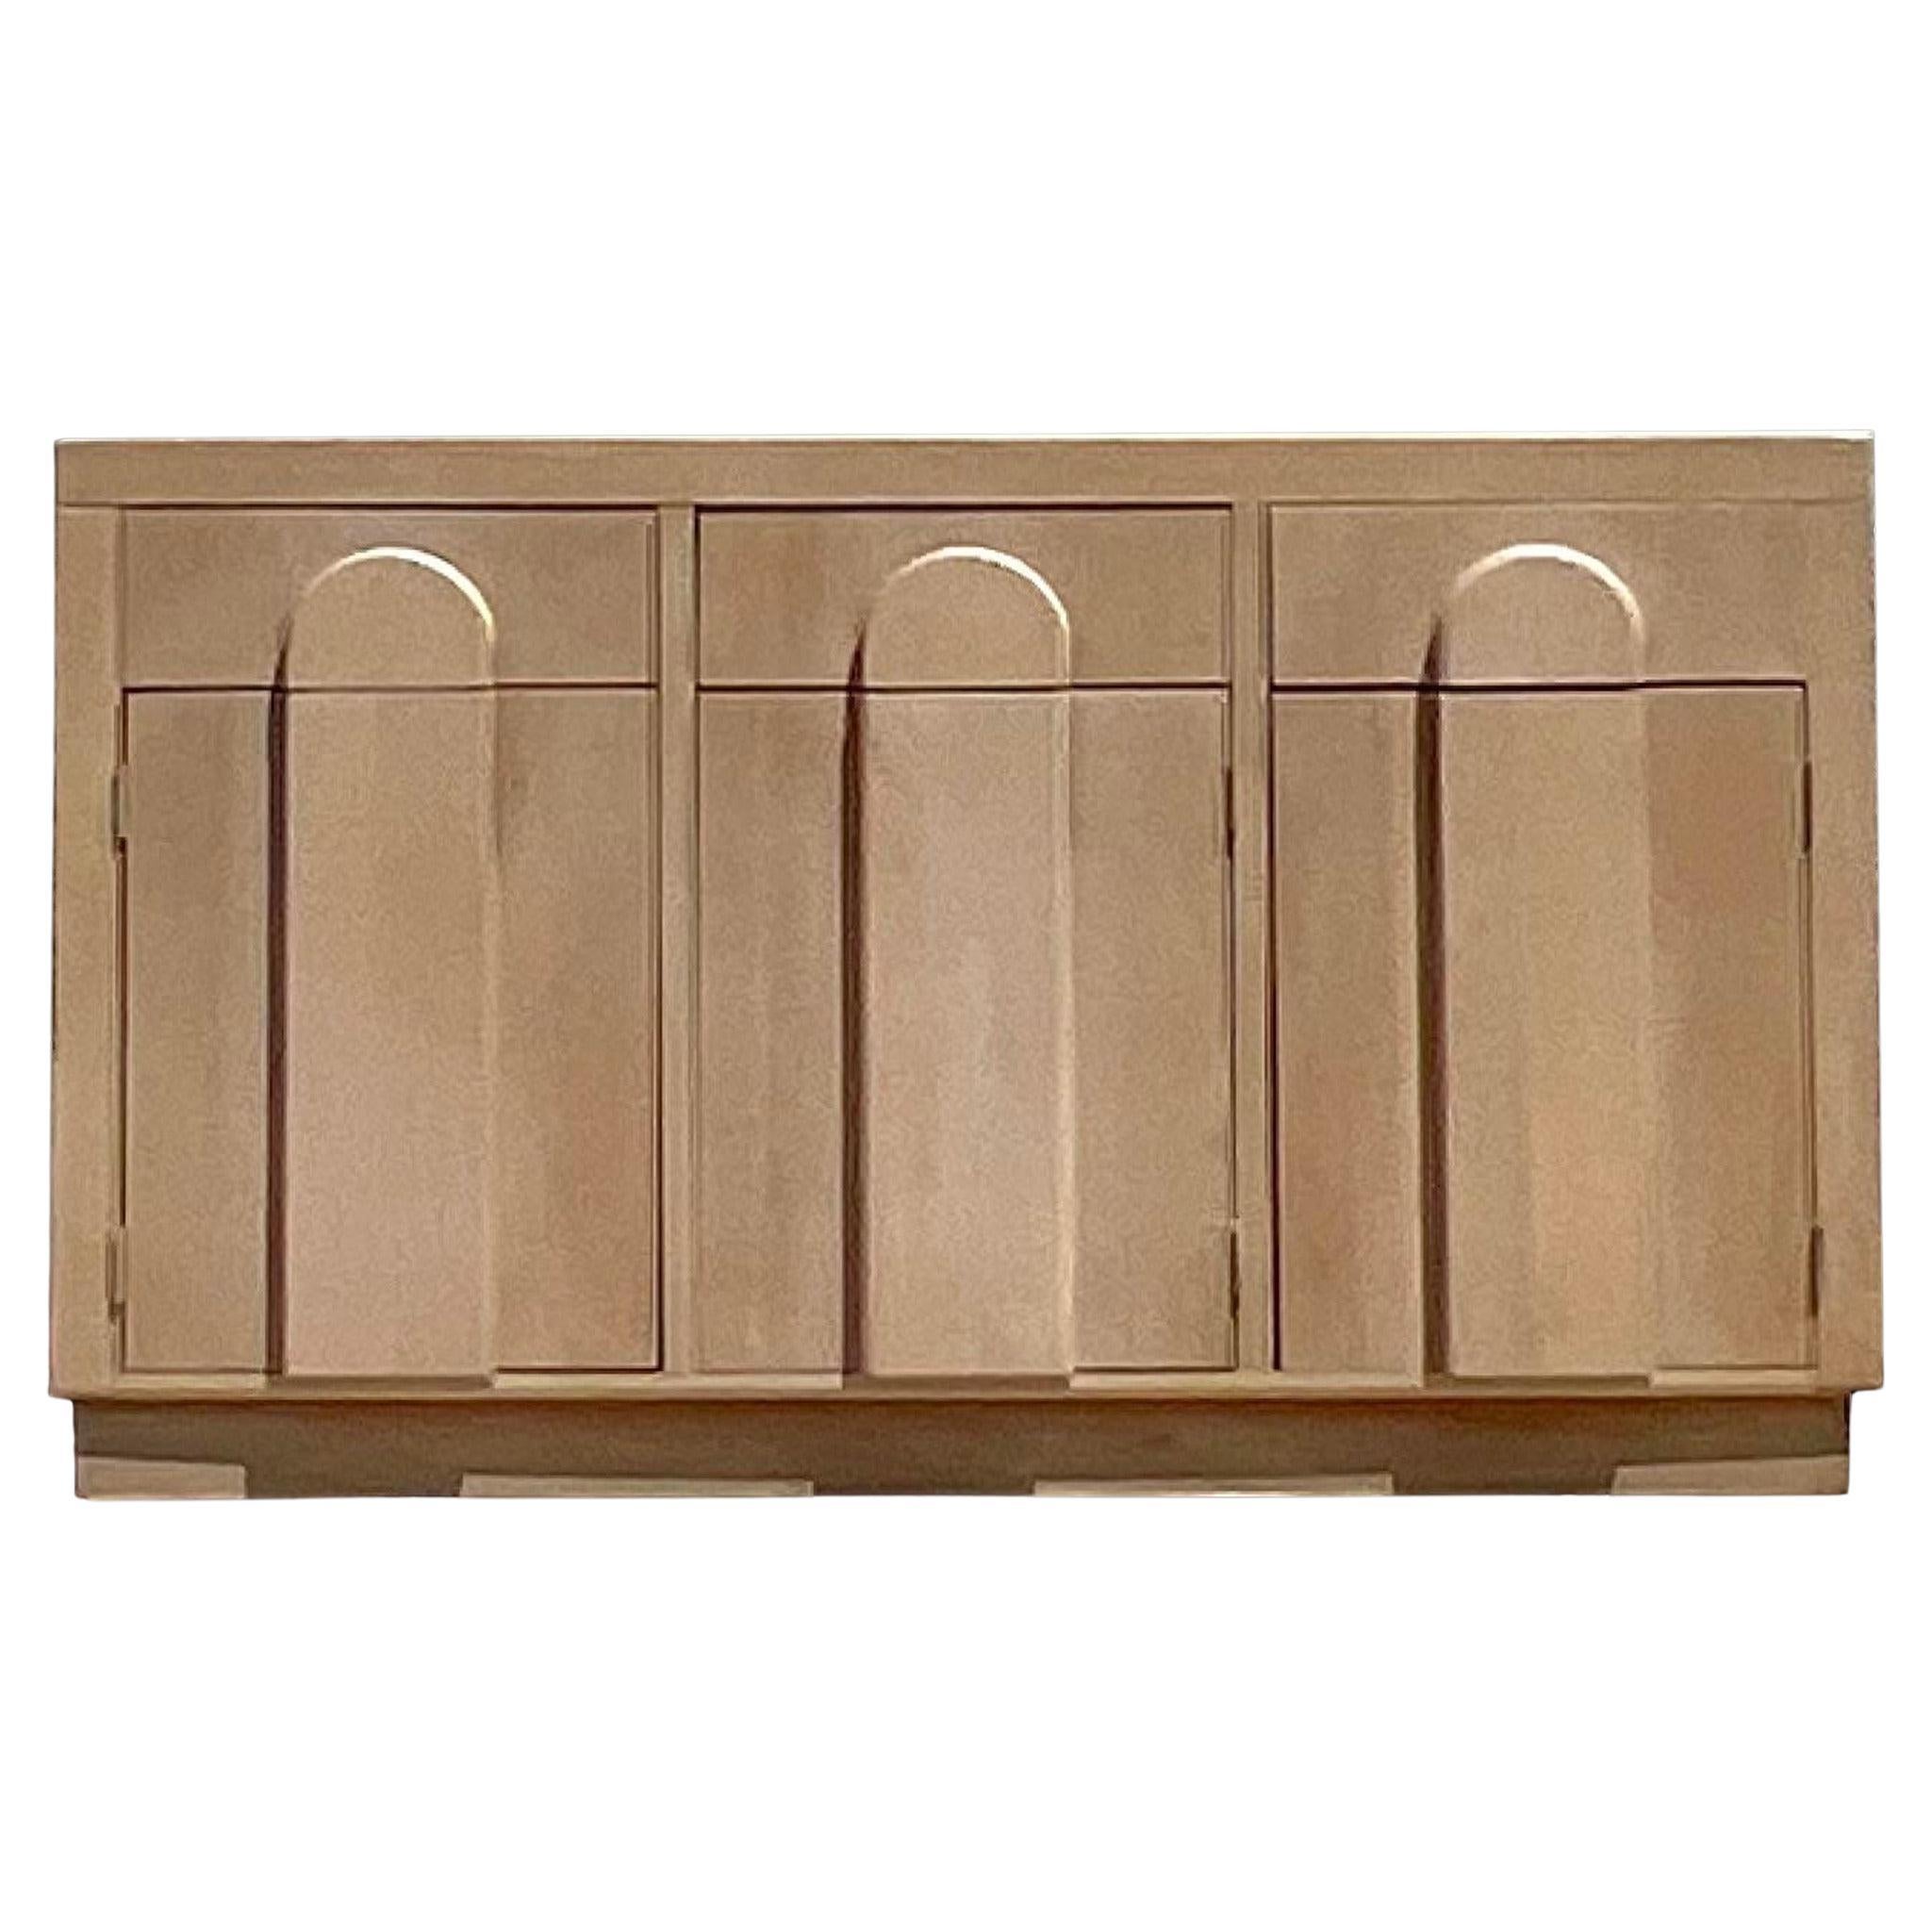 Late 20th Century Vintage Boho Broyhill Arched Credenza